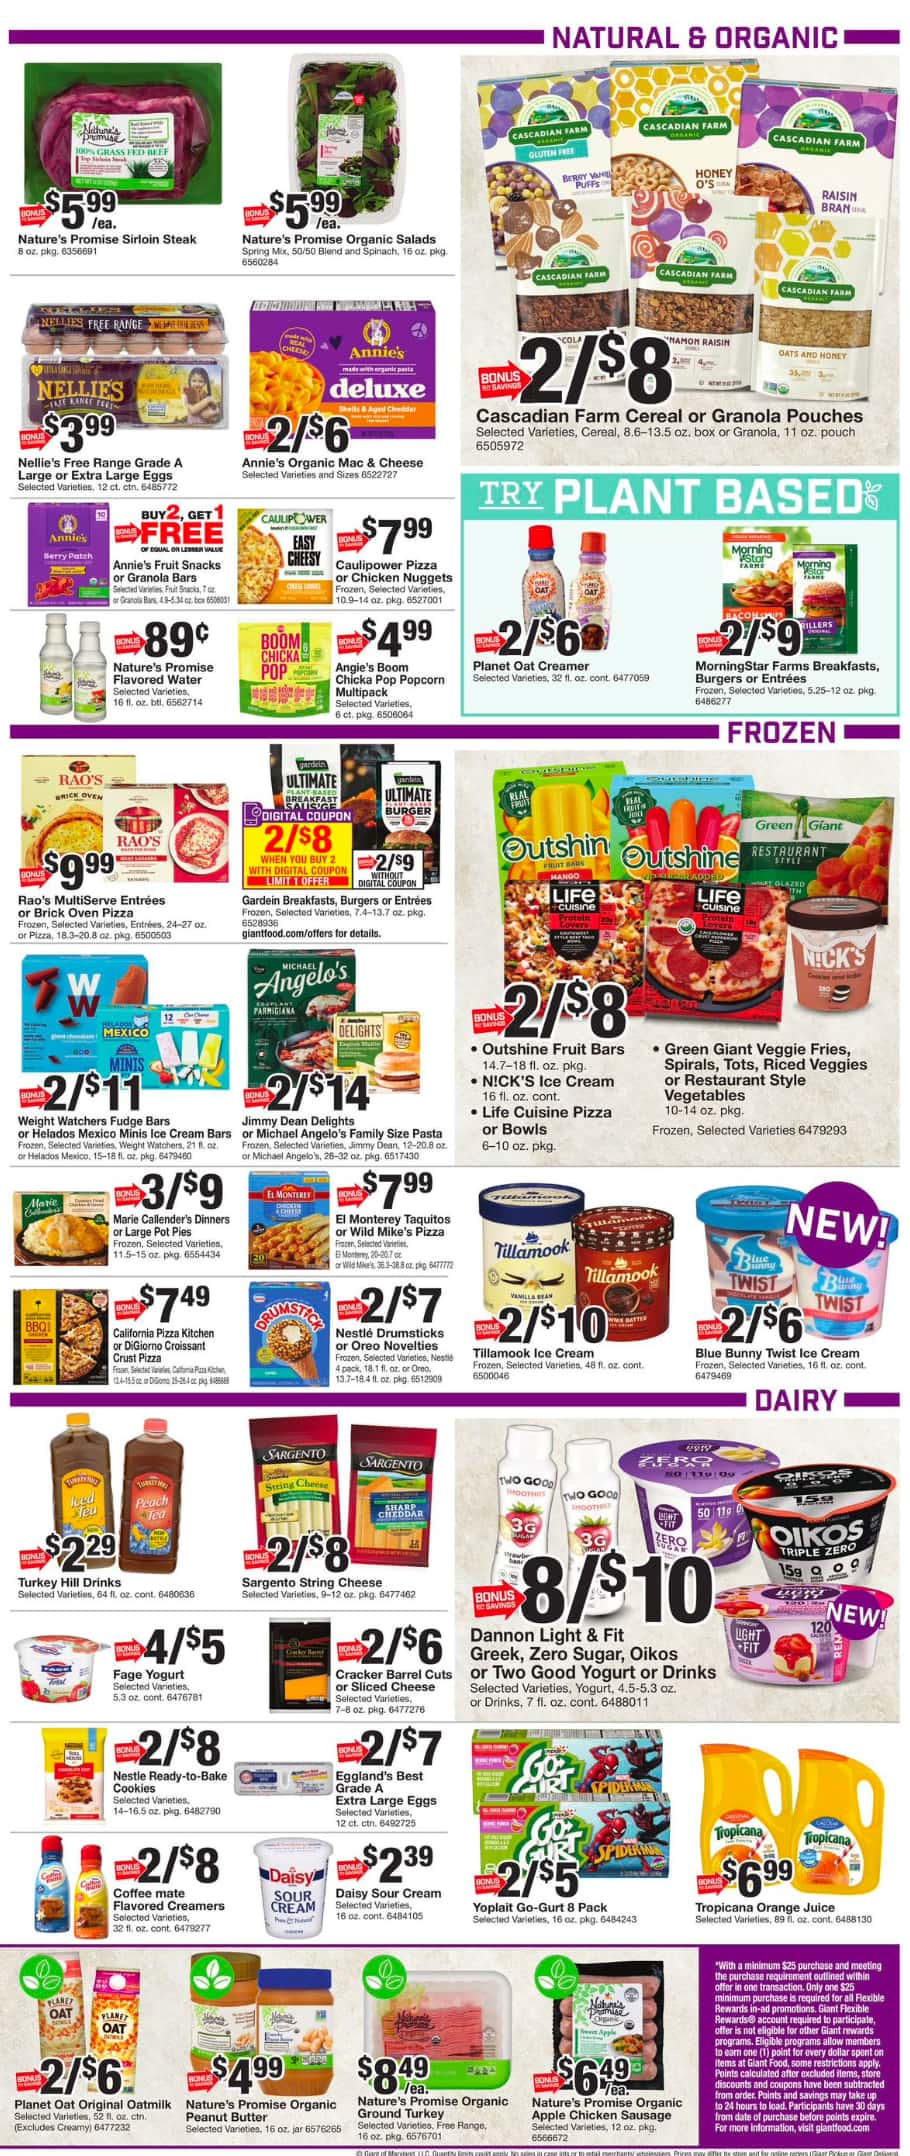 Giant_weekly_ad_041924_03